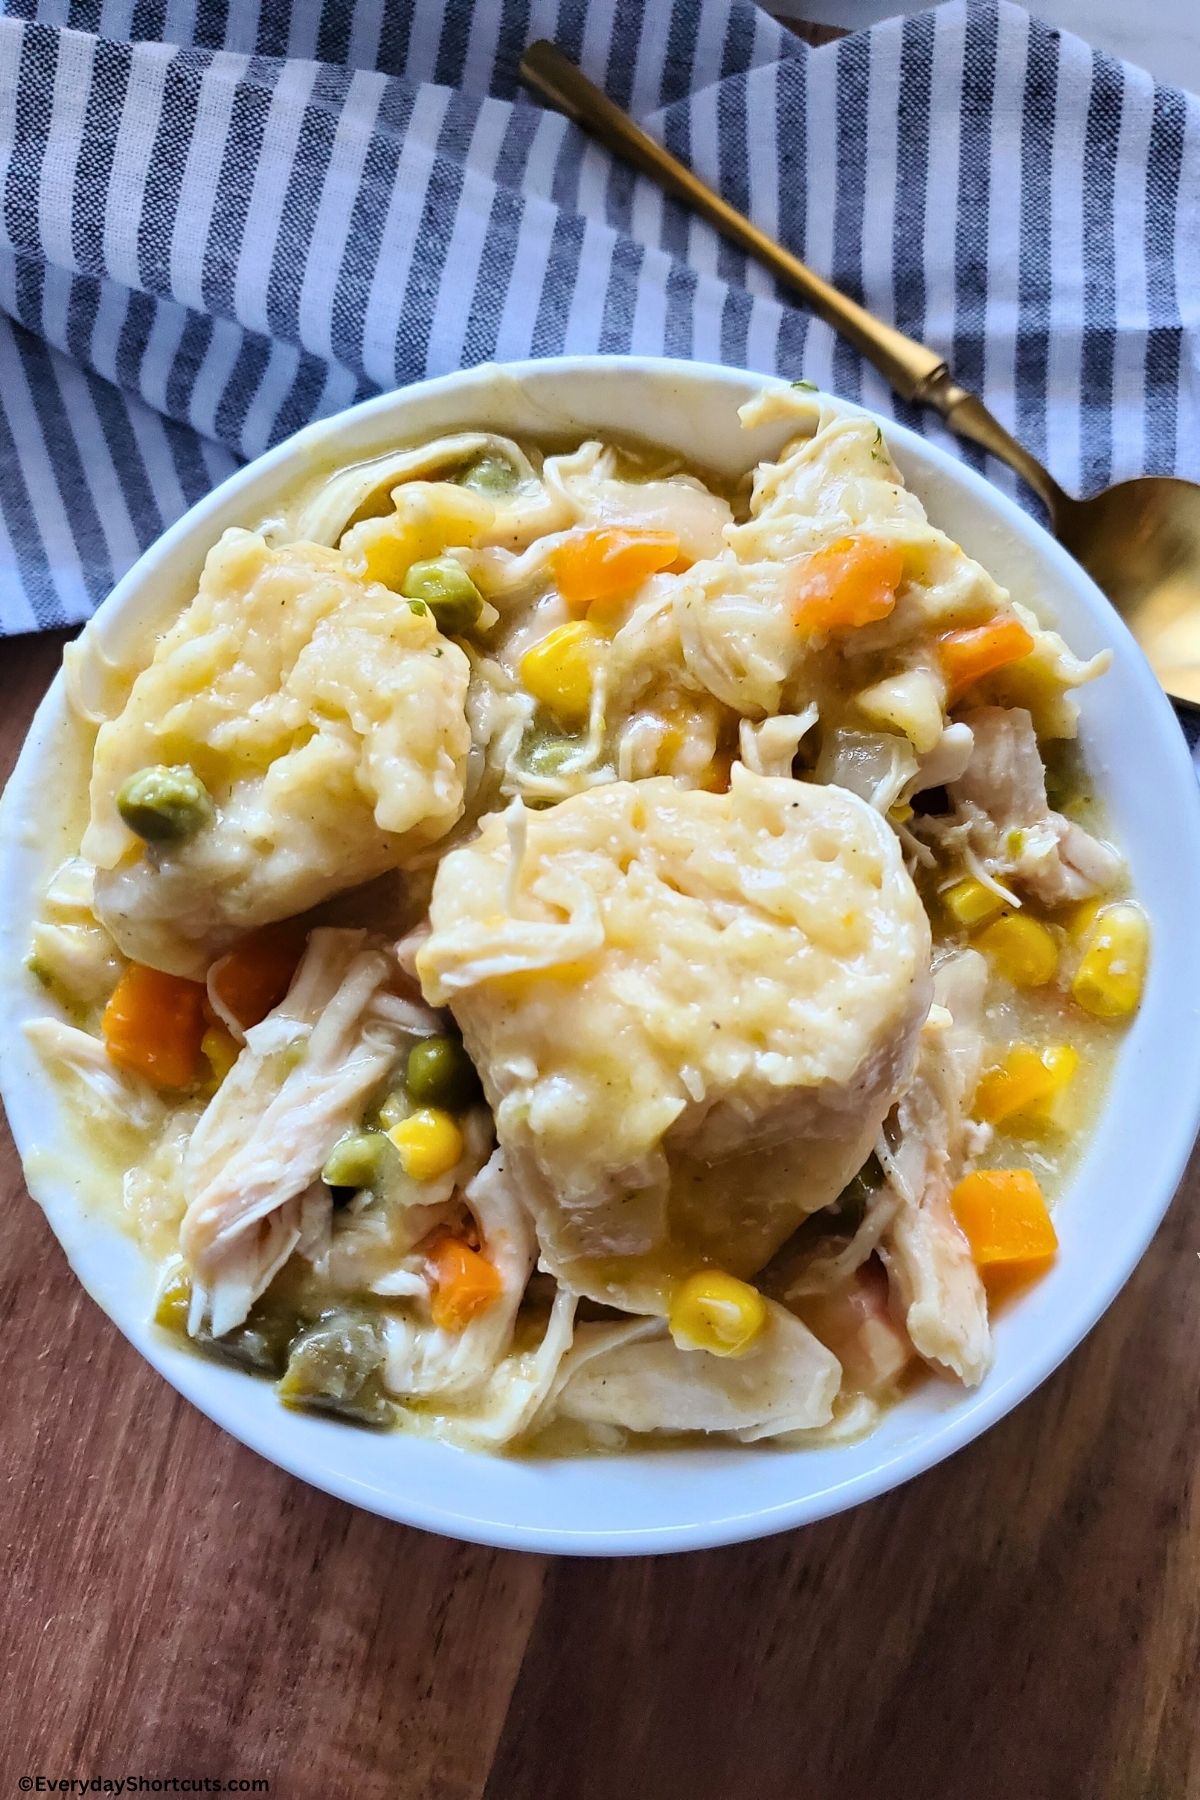 dumplings and chicken in a bowl